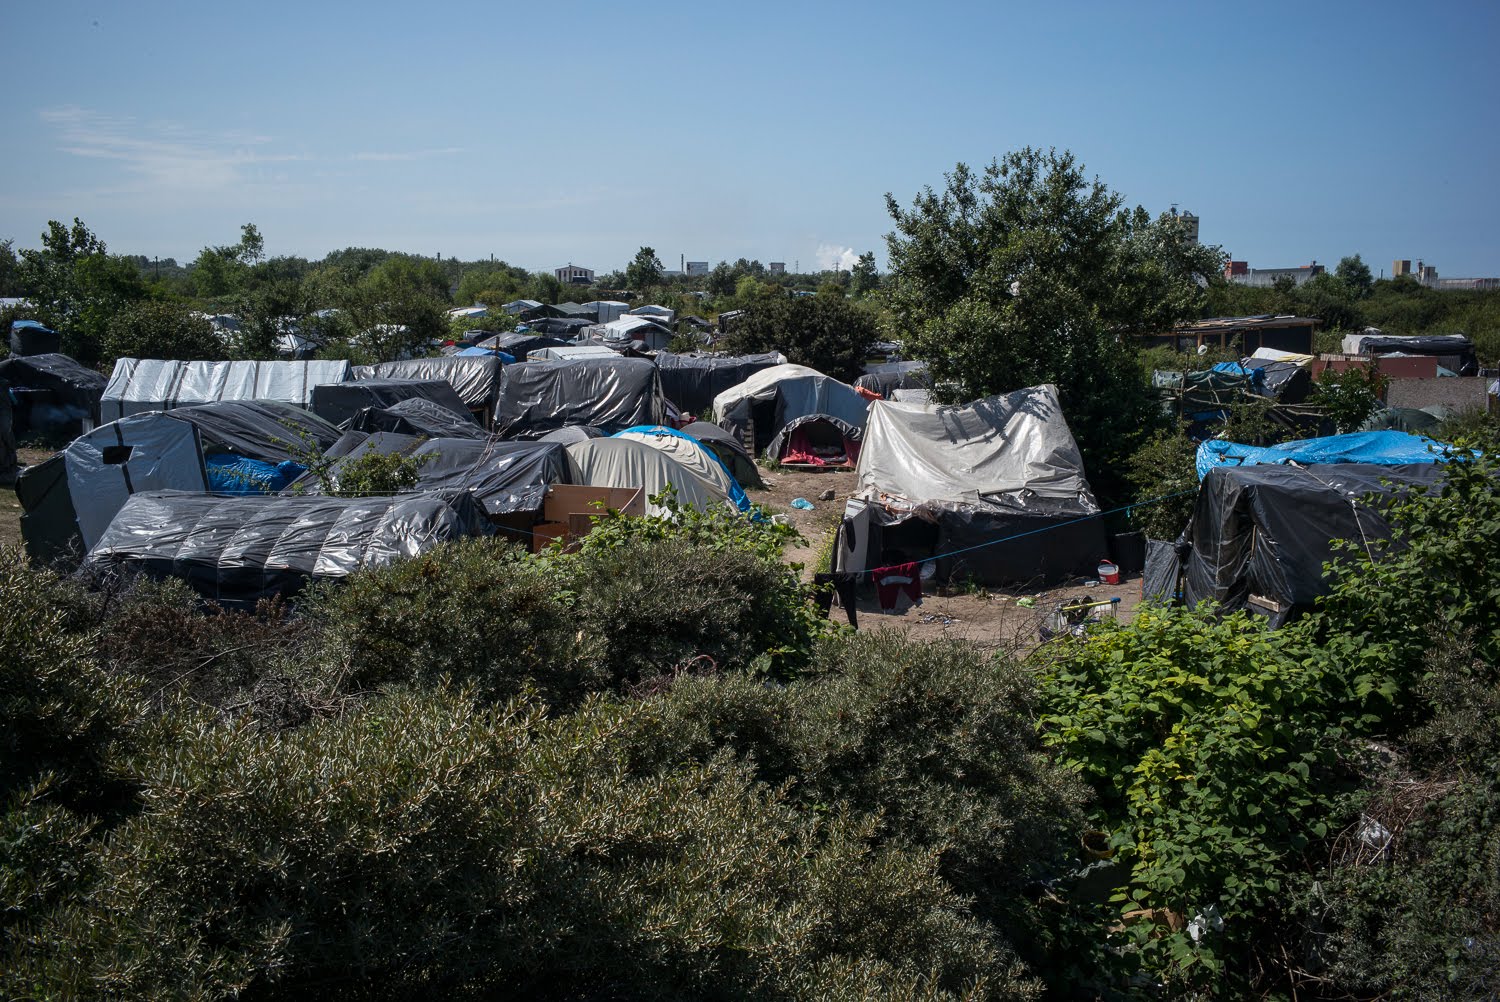 Refugees's camp in France ( Calais)